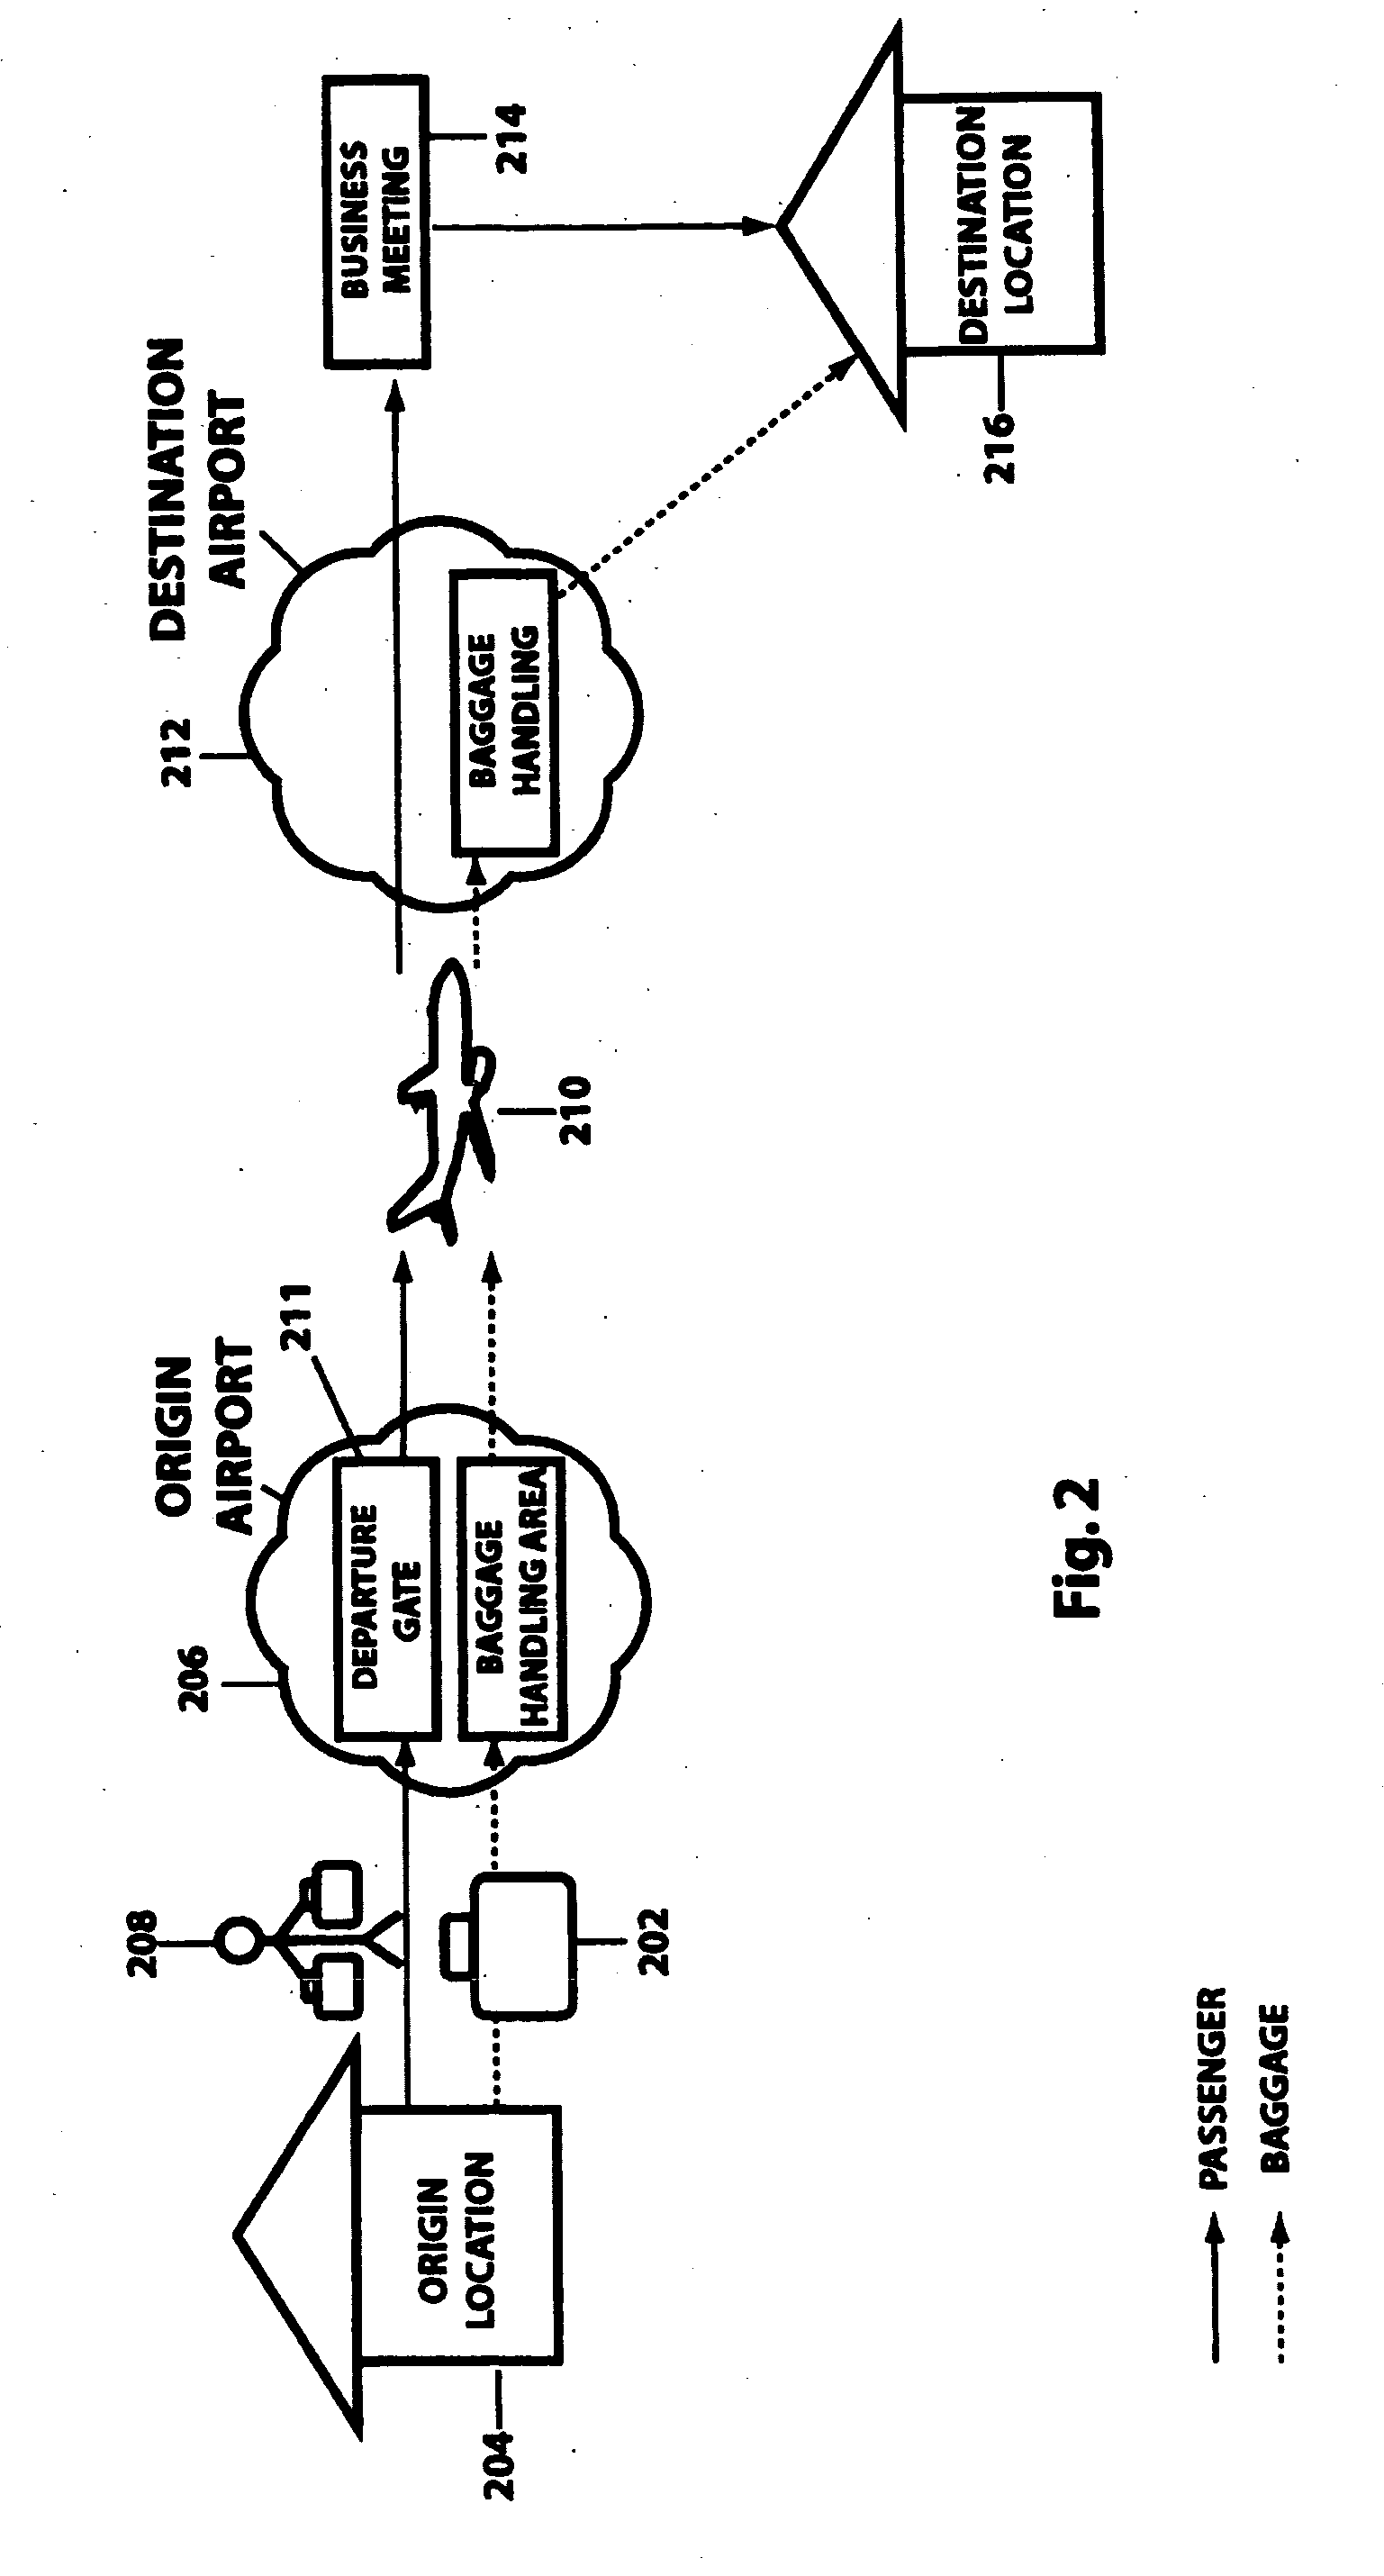 Baggage transportation security system and method